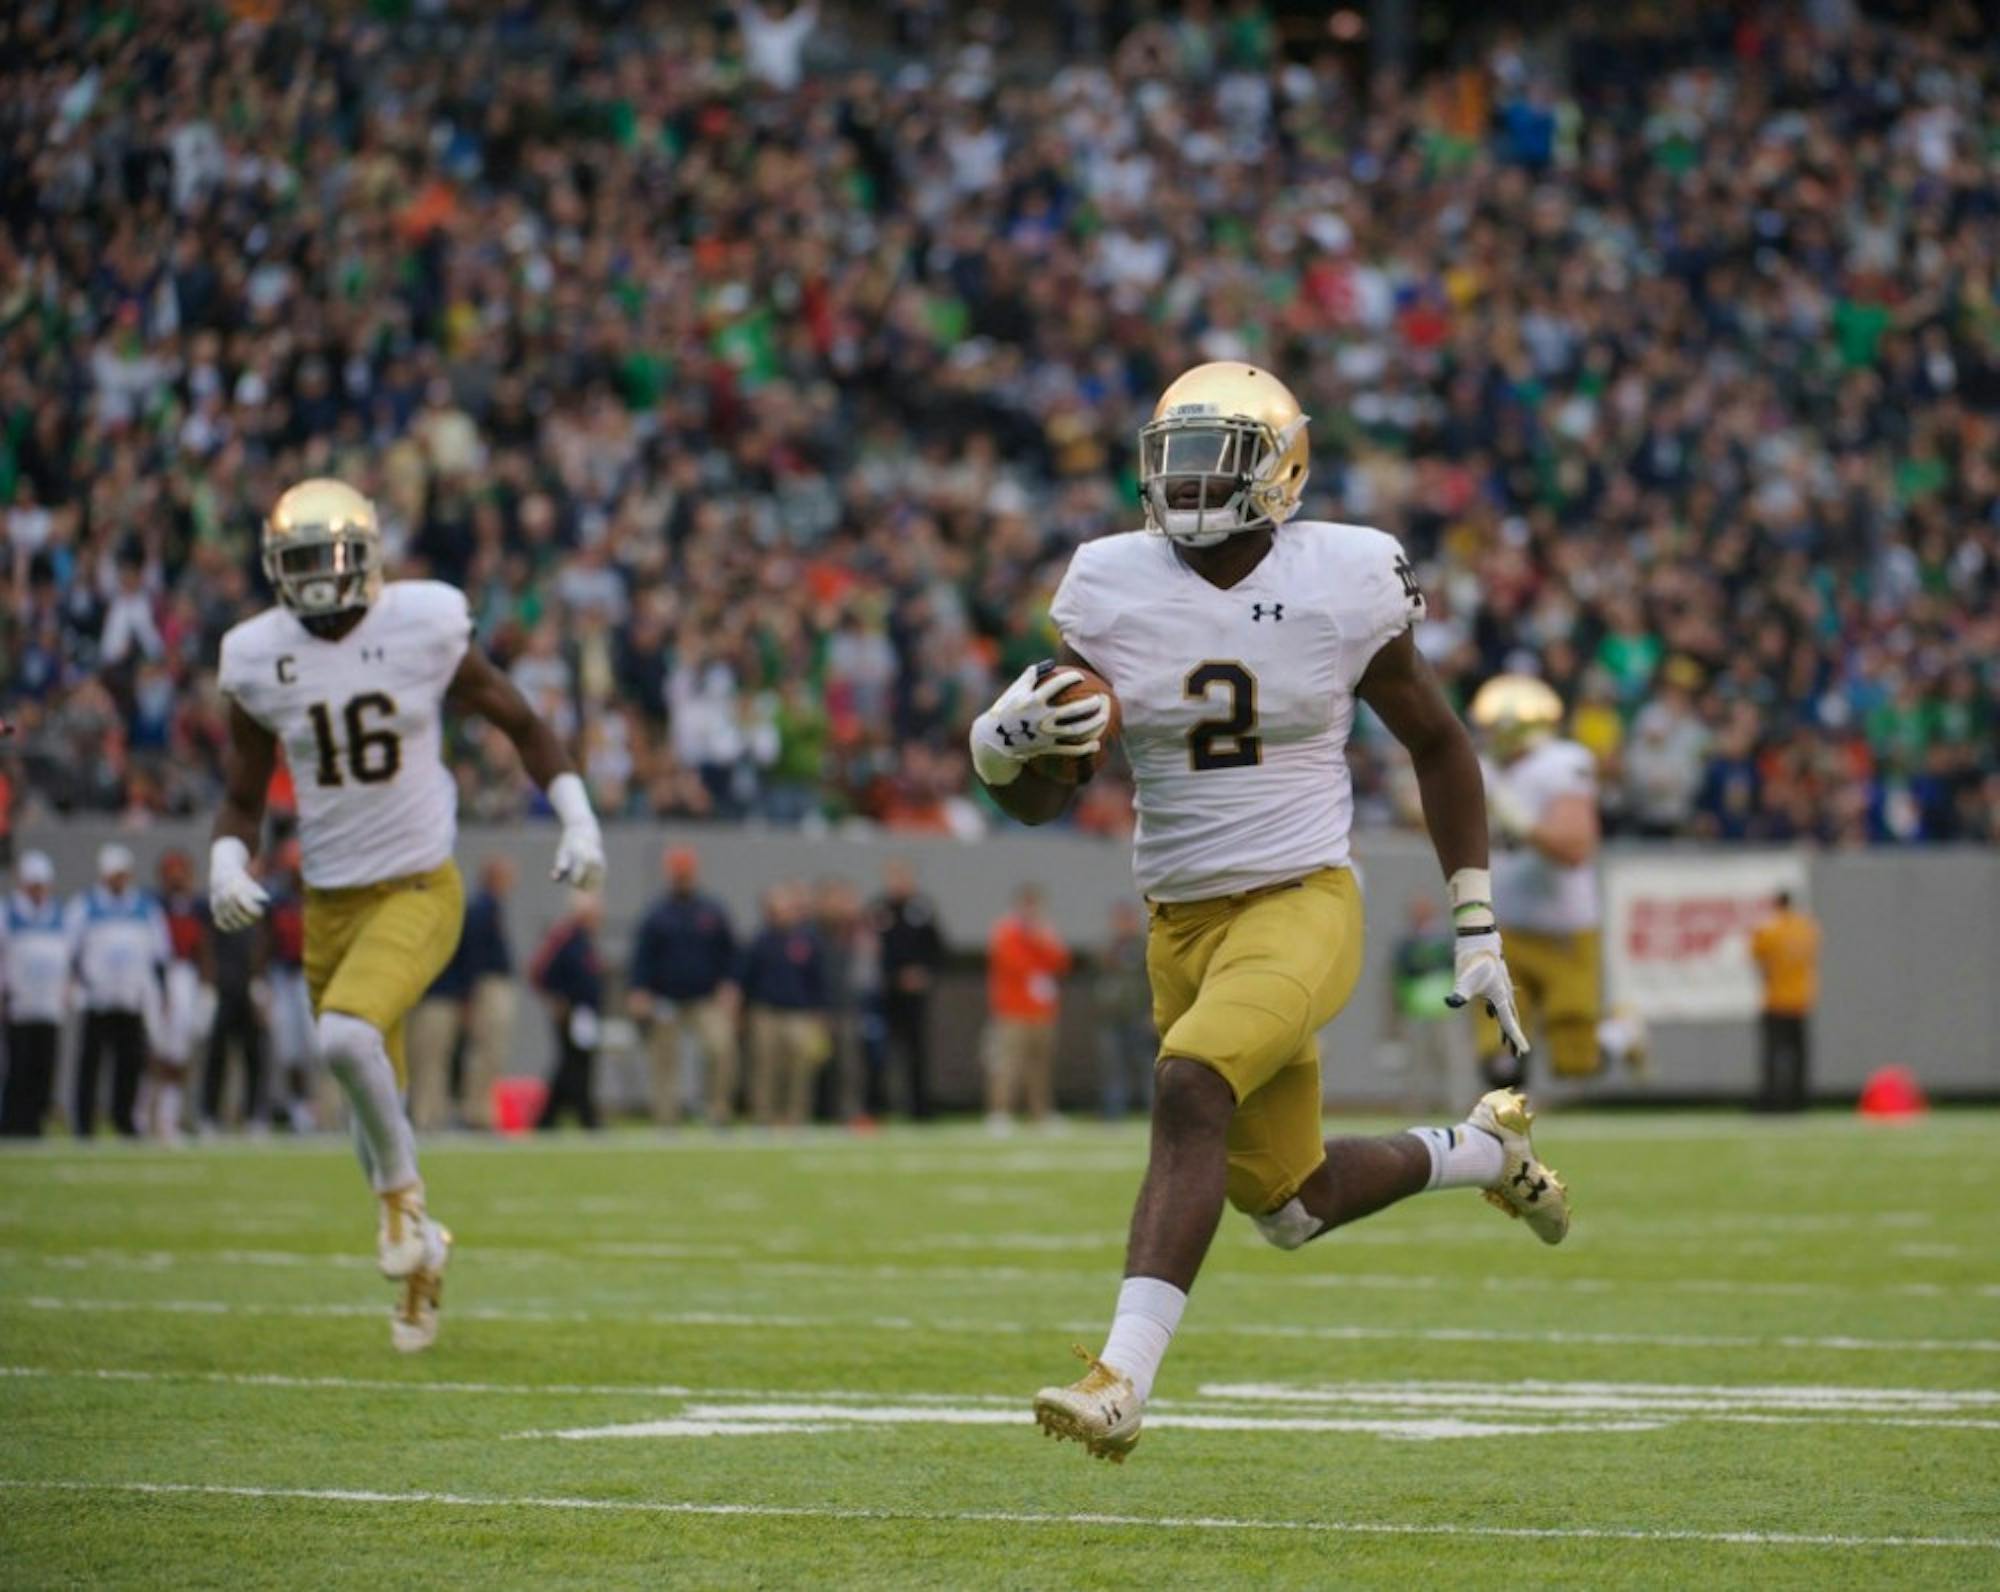 Irish sophomore running back Dexter Williams streaks down field during Notre Dame's 50-33 victory over Syracuse at MetLife Stadium.